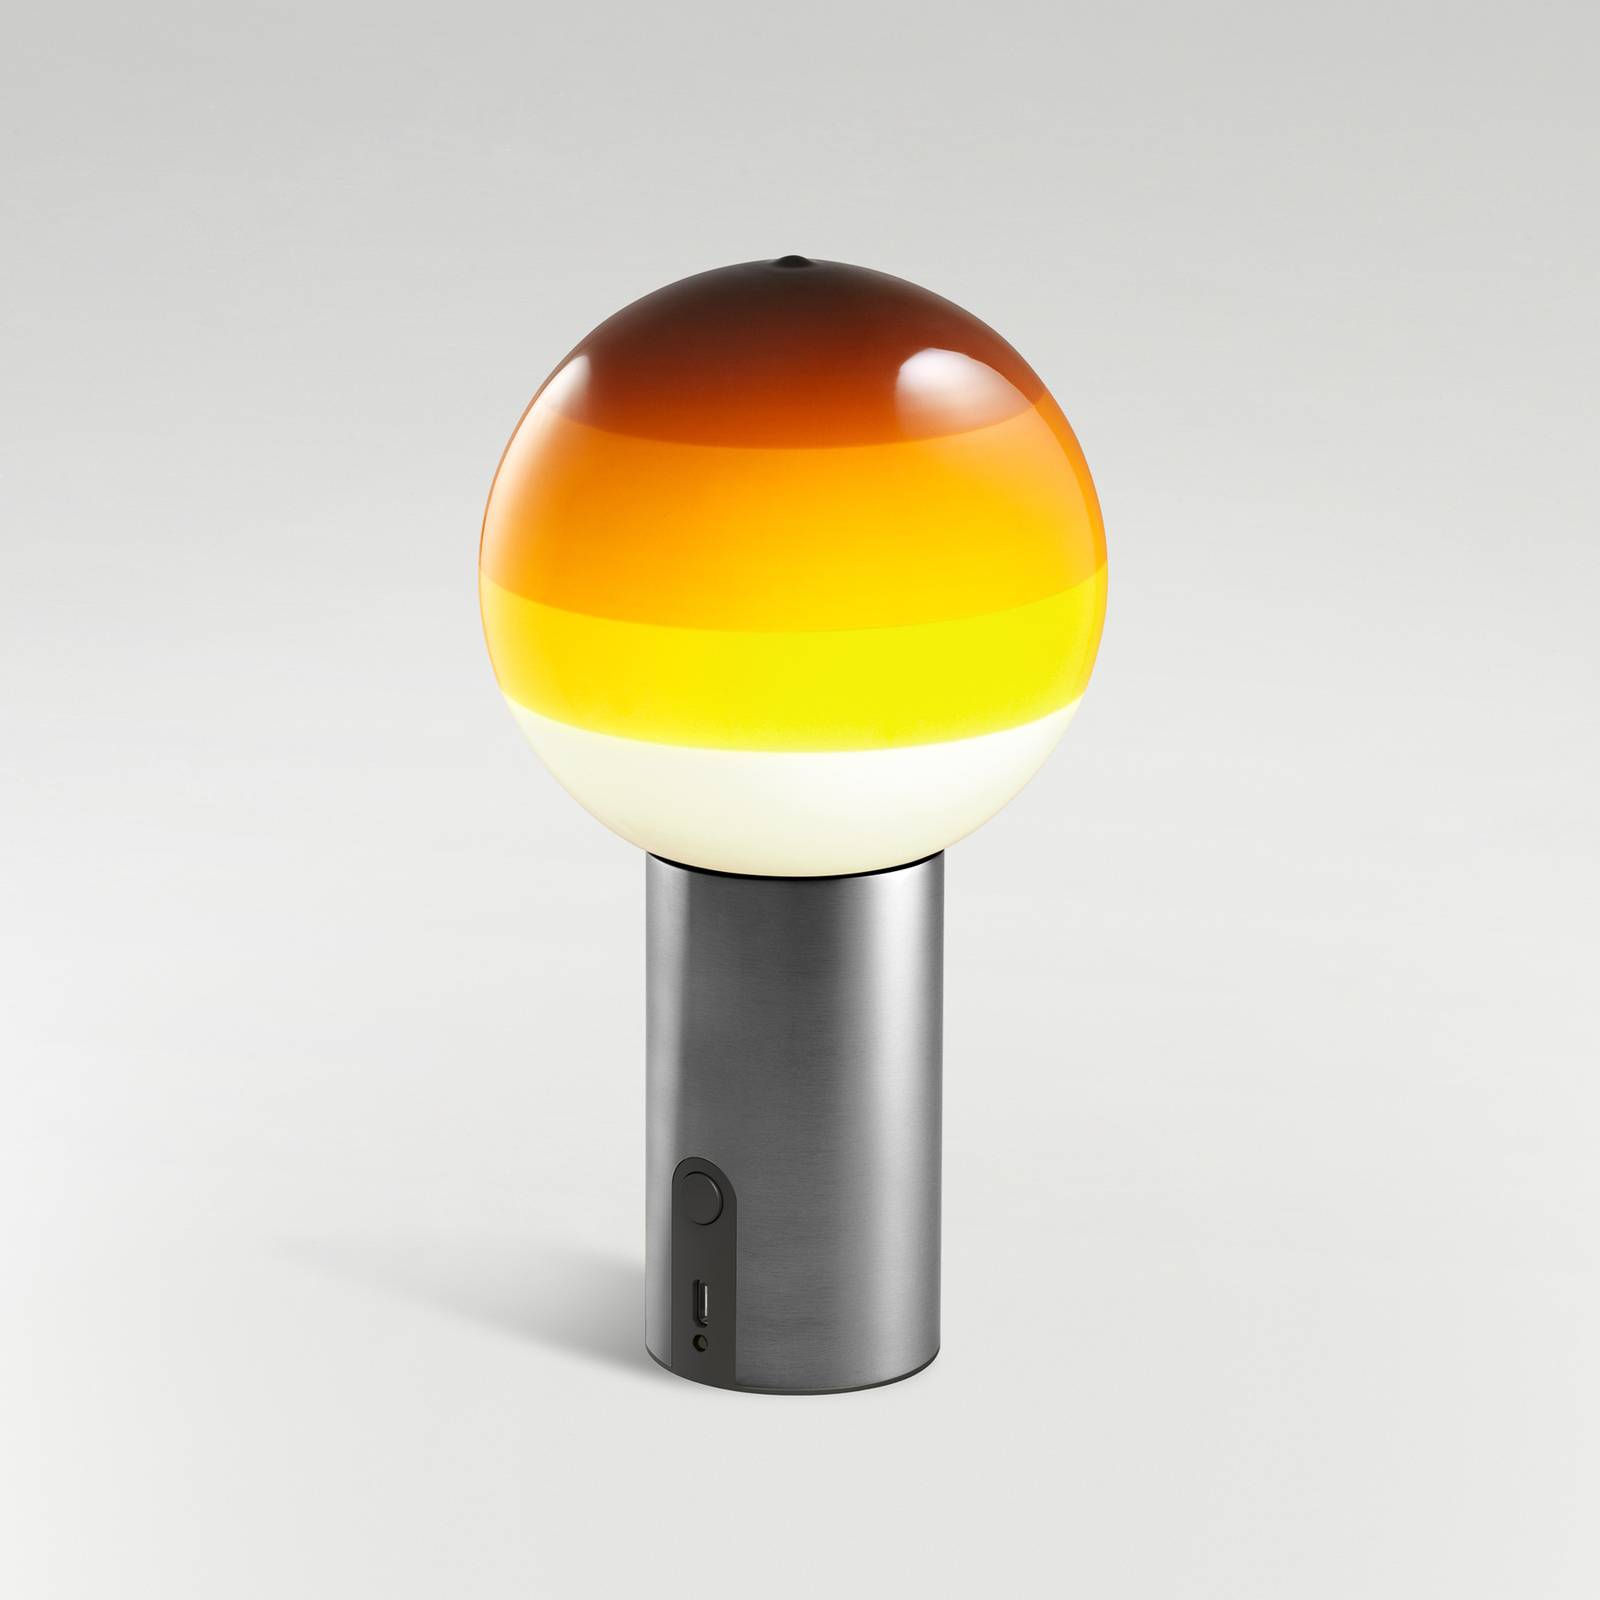 Image of MARSET Dipping Light lampe à poser ambre/graphite 8435516841663